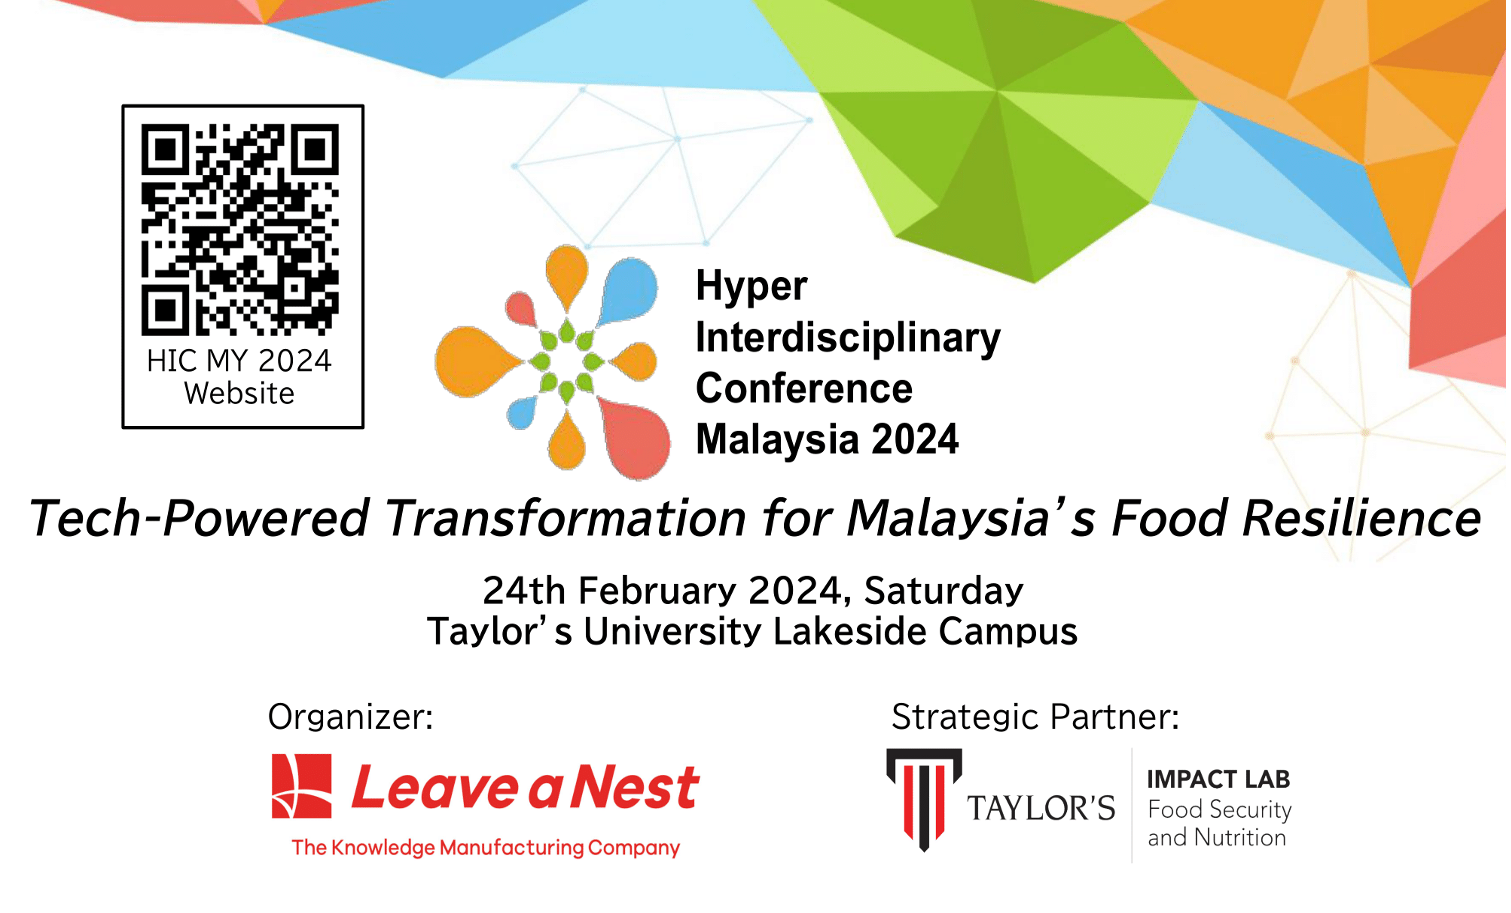 Calling for Poster Presenters at the Hyper Interdisciplinary Conference (HIC) Malaysia 2024